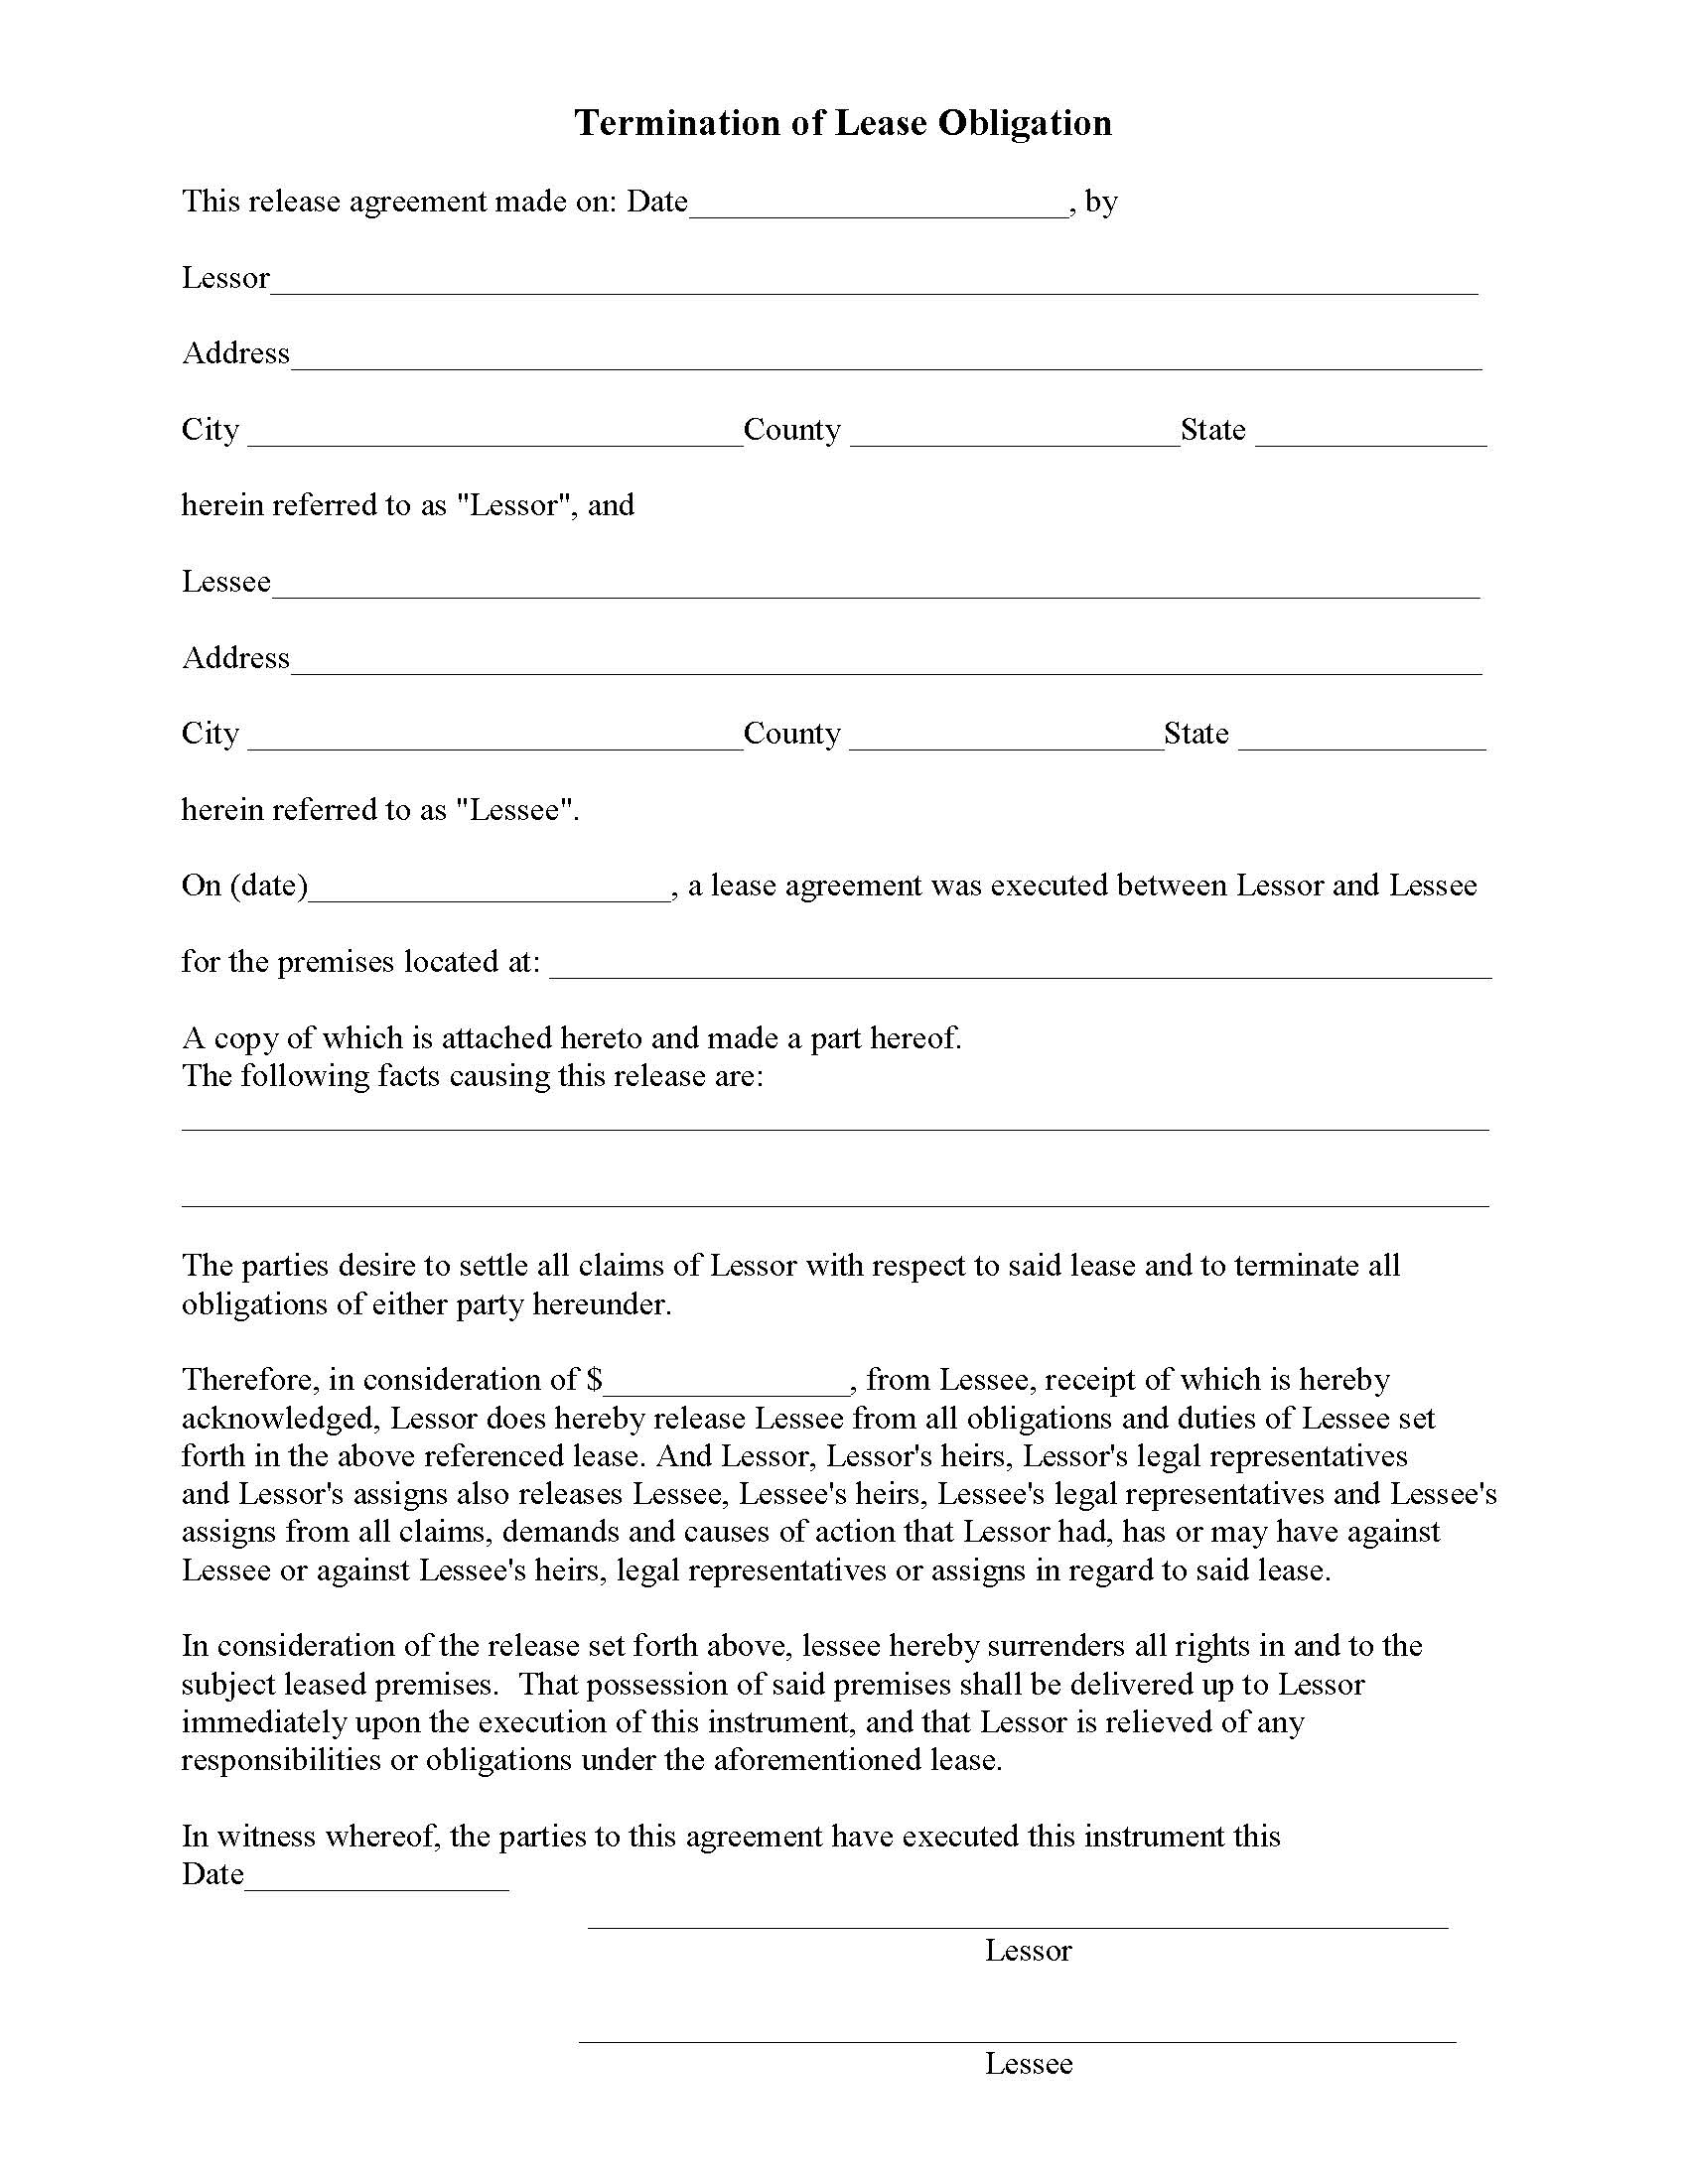 Examples Of Lease Agreements Lease Release Form Termination Of Lease Obligation Release Forms